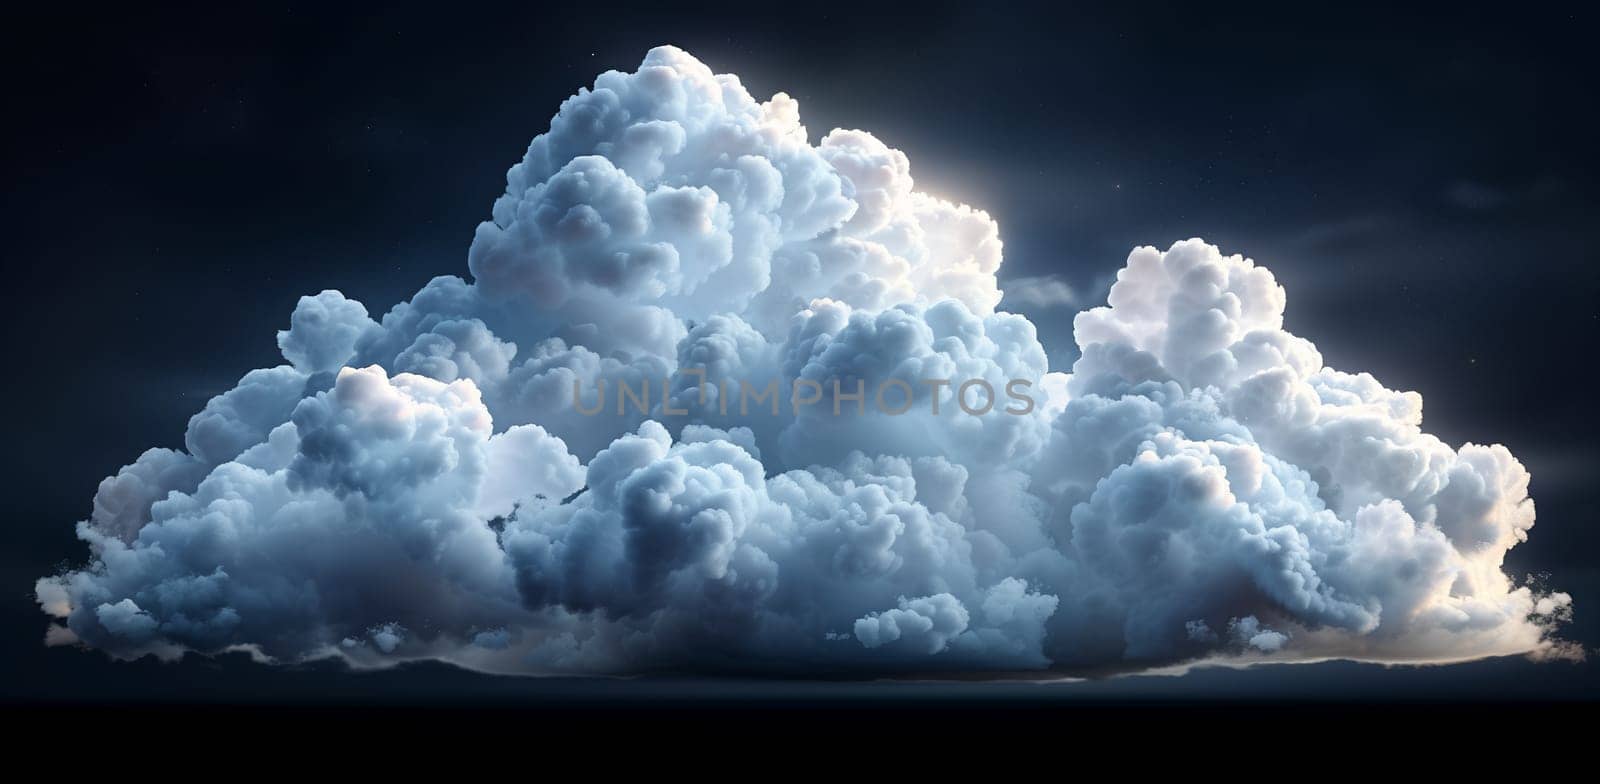 A cumulus cloud, with the sun shining through it, creates an electric blue sky. A meteorological phenomenon adding beauty to the natural landscape